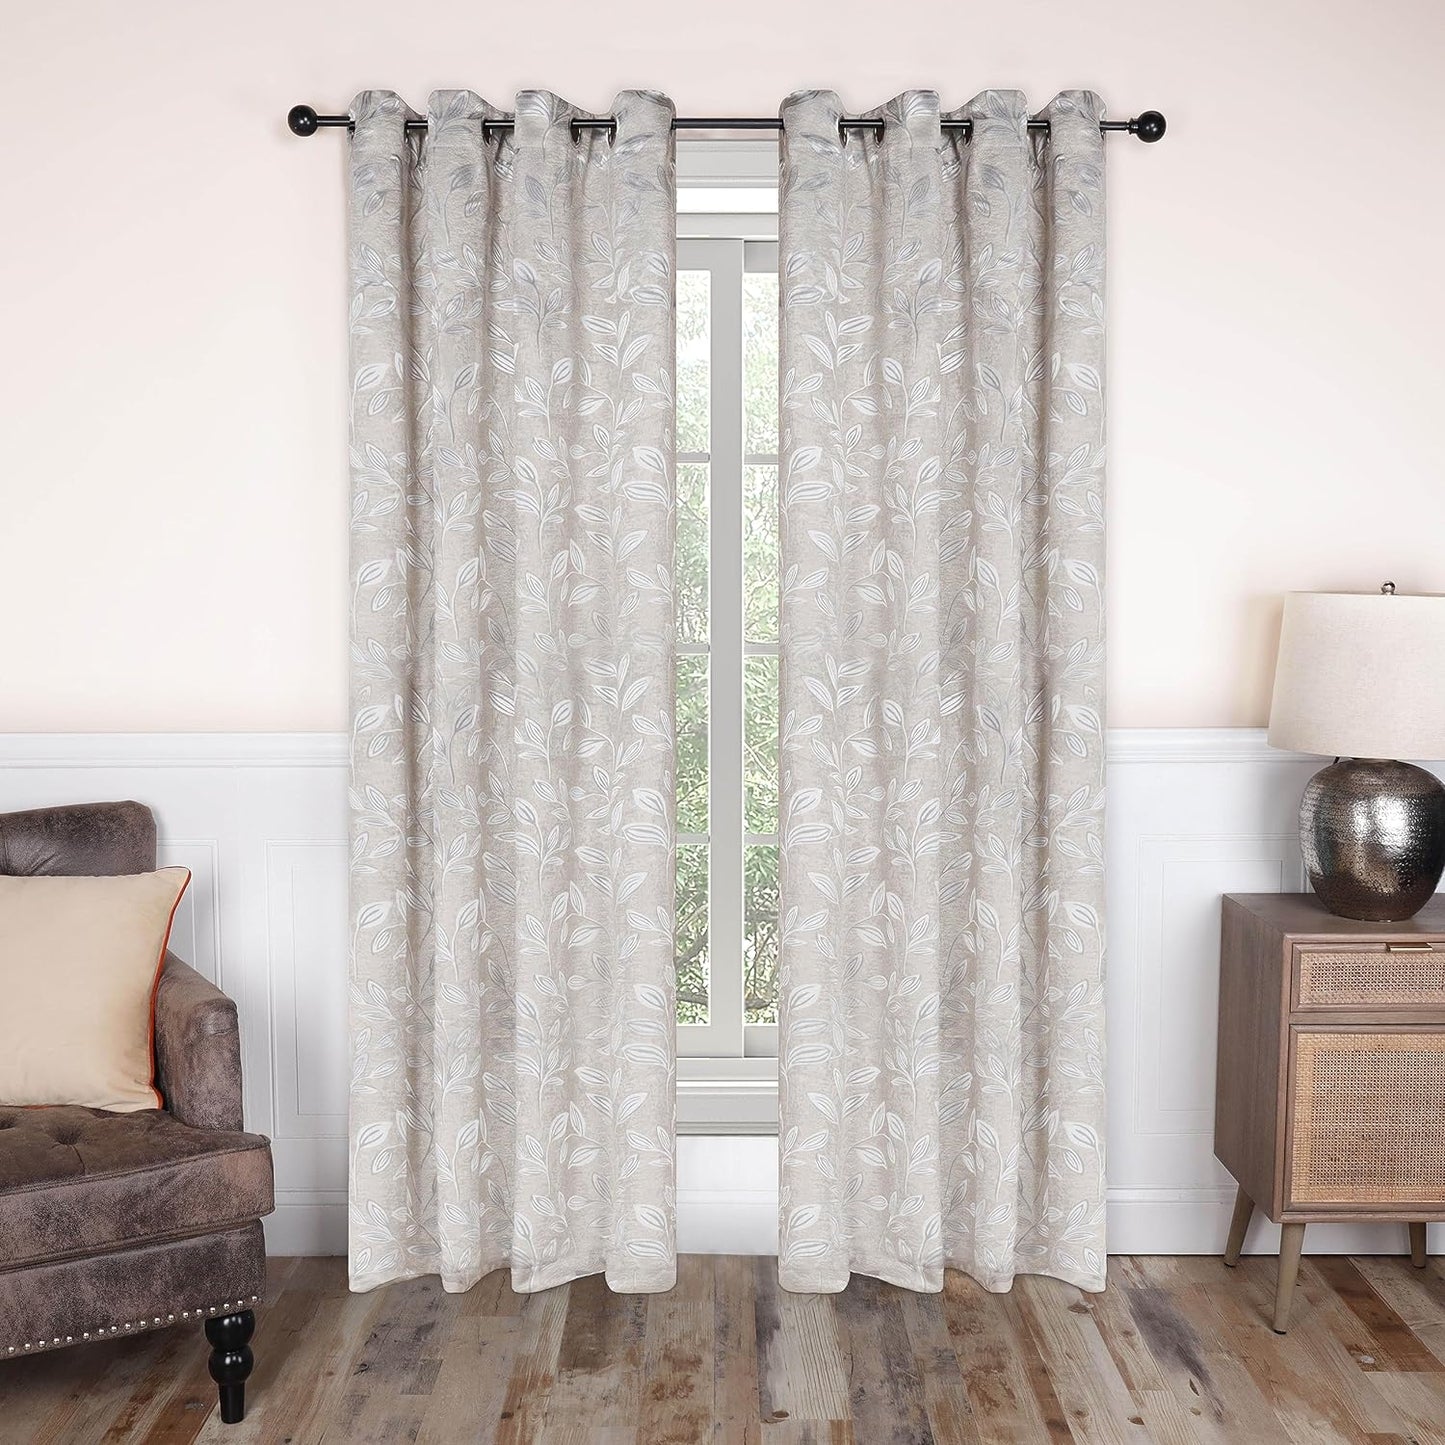 Superior Blackout Curtains, Room Darkening Window Accent for Bedroom, Sun Blocking, Thermal, Modern Bohemian Curtains, Leaves Collection, Set of 2 Panels, Rod Pocket - 52 in X 63 In, Nickel Black  Home City Inc. Ivory 52 In X 108 In (W X L) 